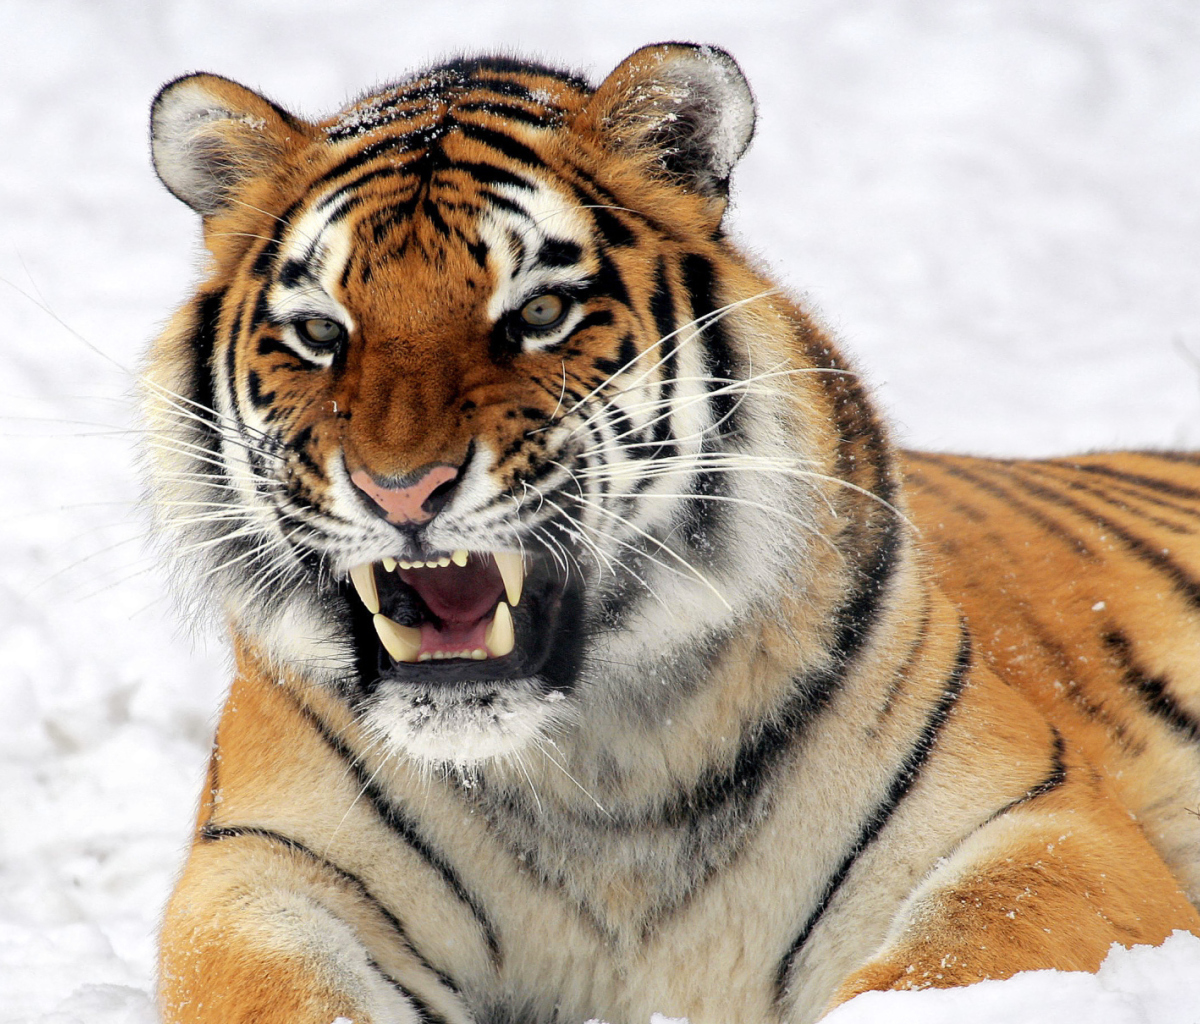 Tiger In The Snow wallpaper 1200x1024